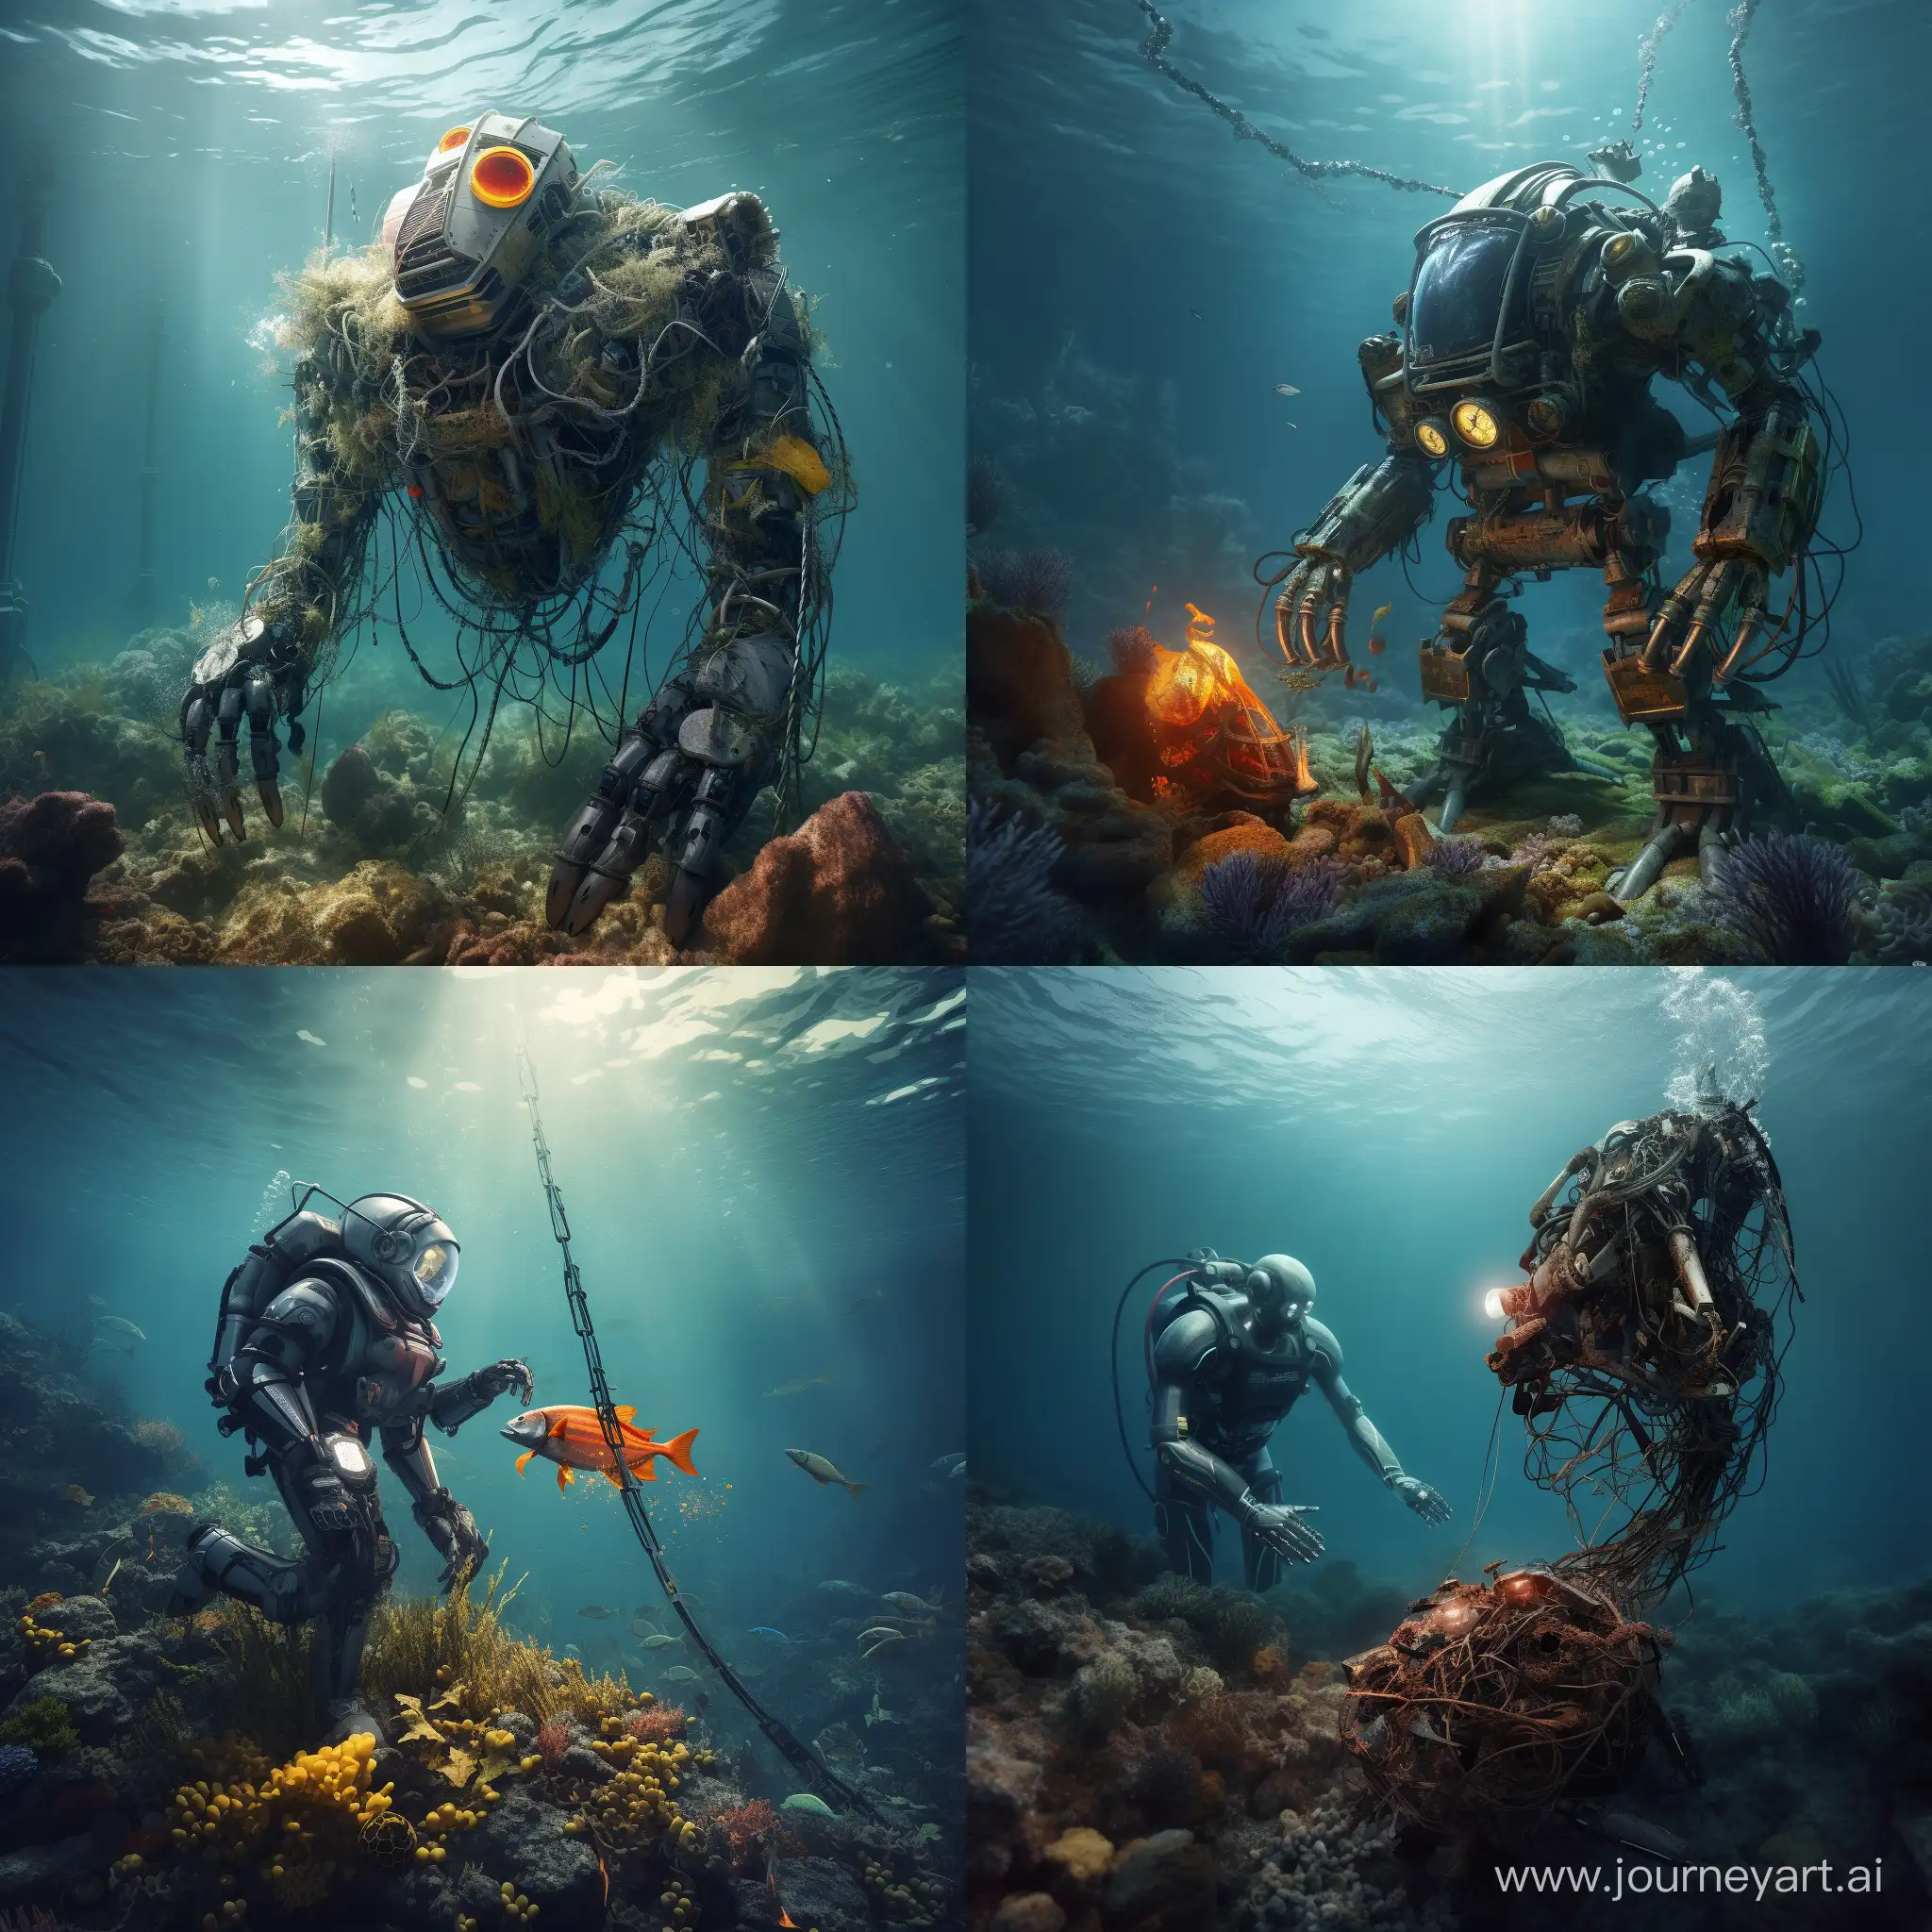 Create a robot that will pick up garbage on the seabed. and add i big net where the robot can put it